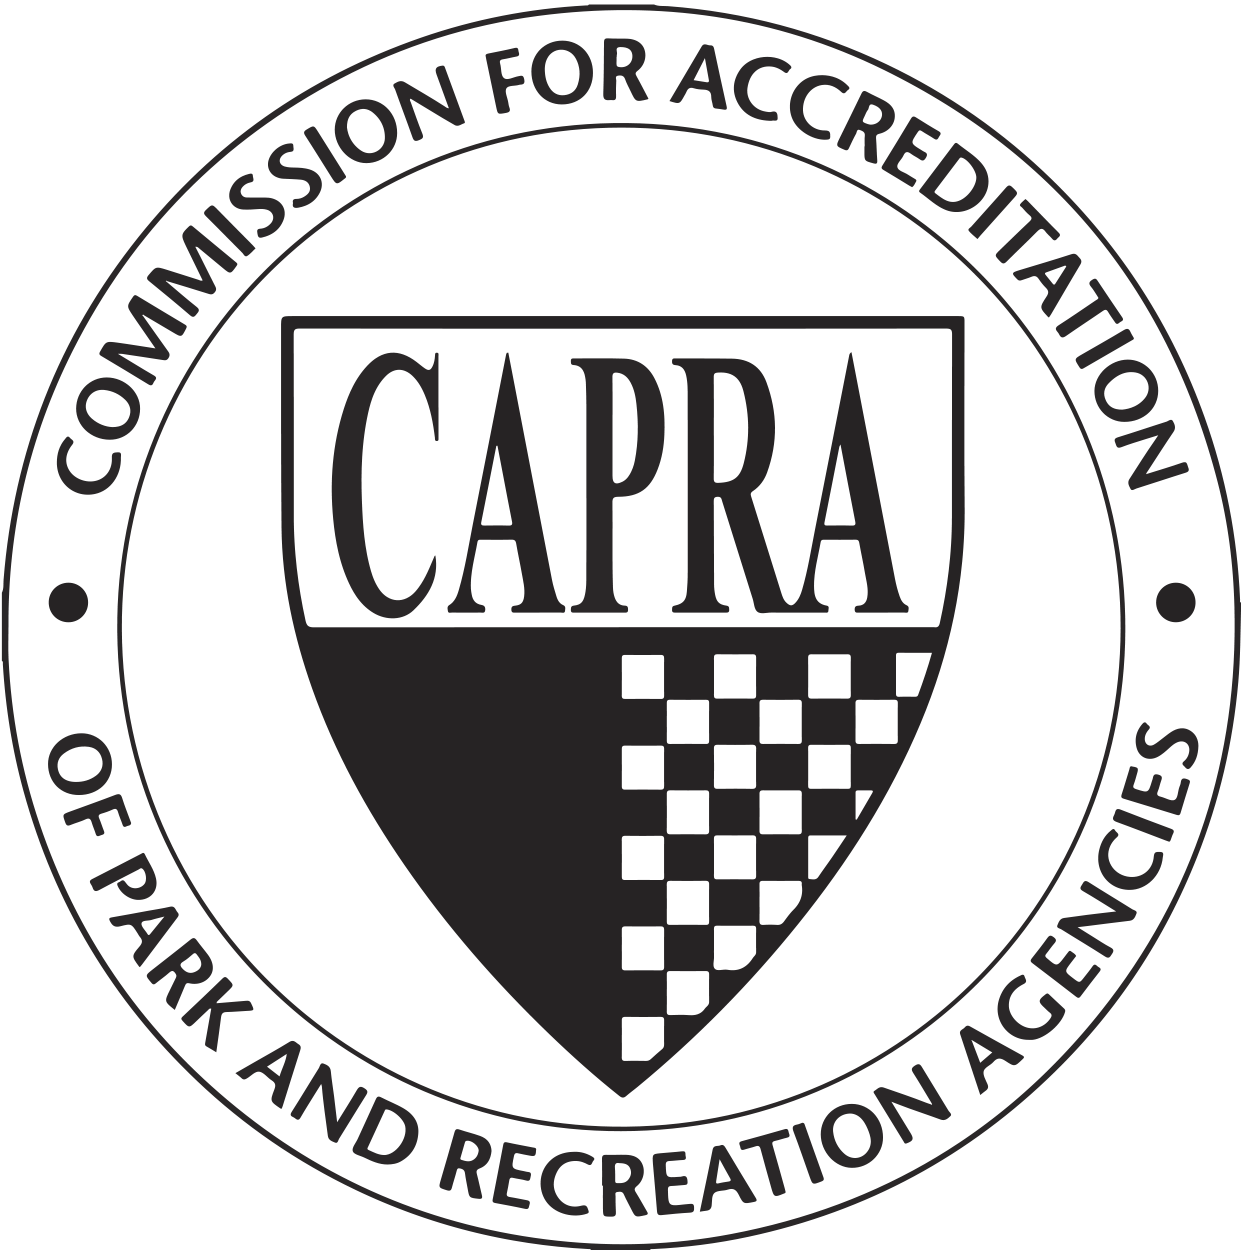 Commission for Accreditation of Park and Recreation Agencies Logo